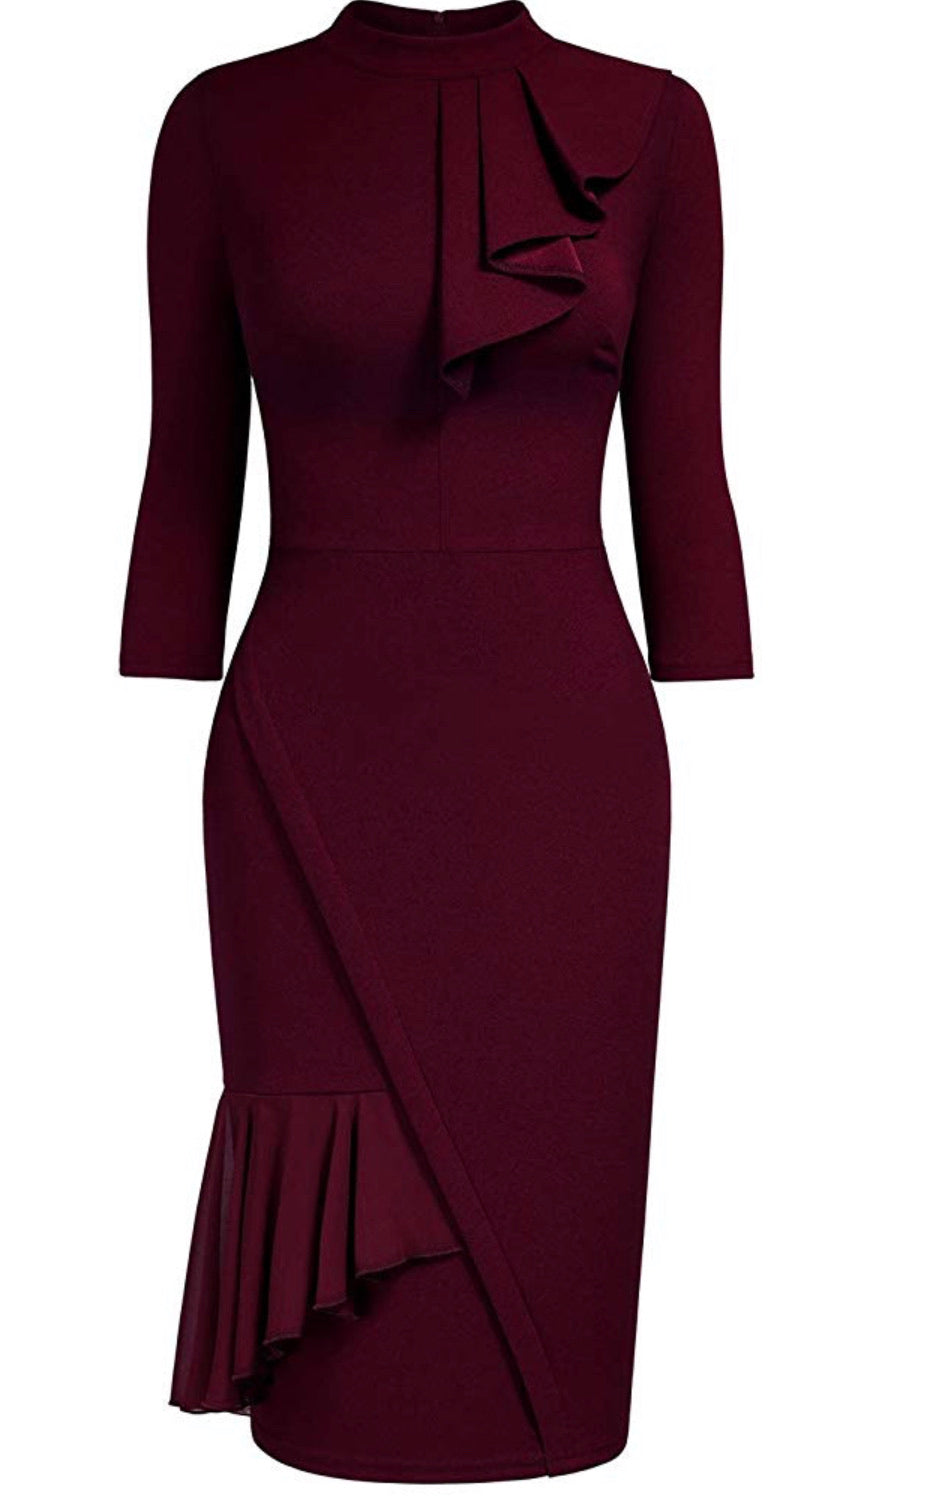 Vintage Inspired Pencil Dress, Sizes Small - 2XLarge (Burgundy)